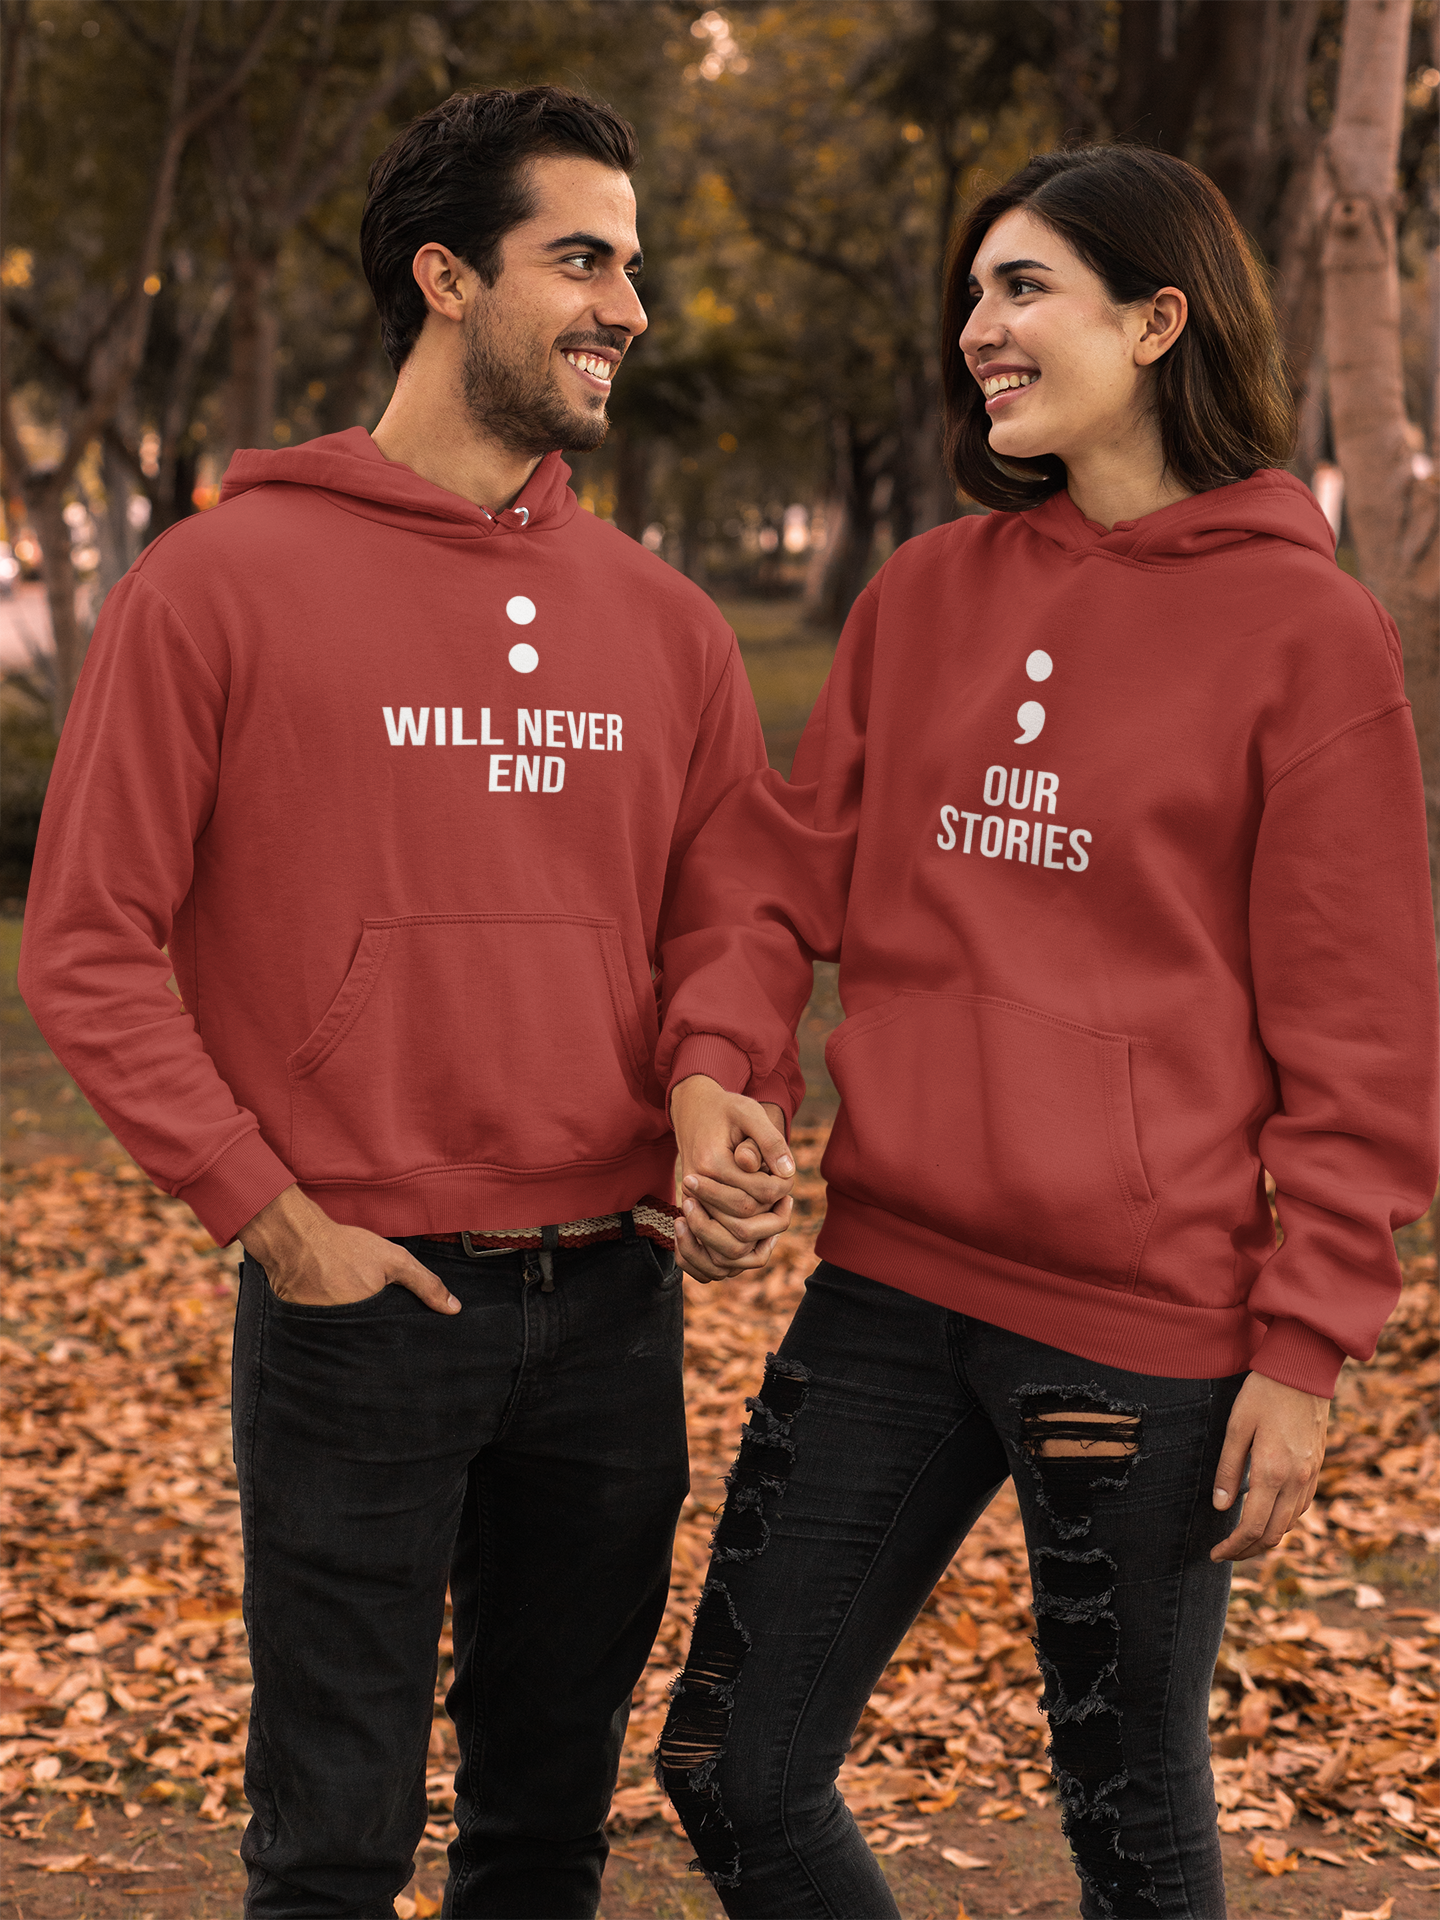 Our Stories Couple Hoodie-FunkyTradtion